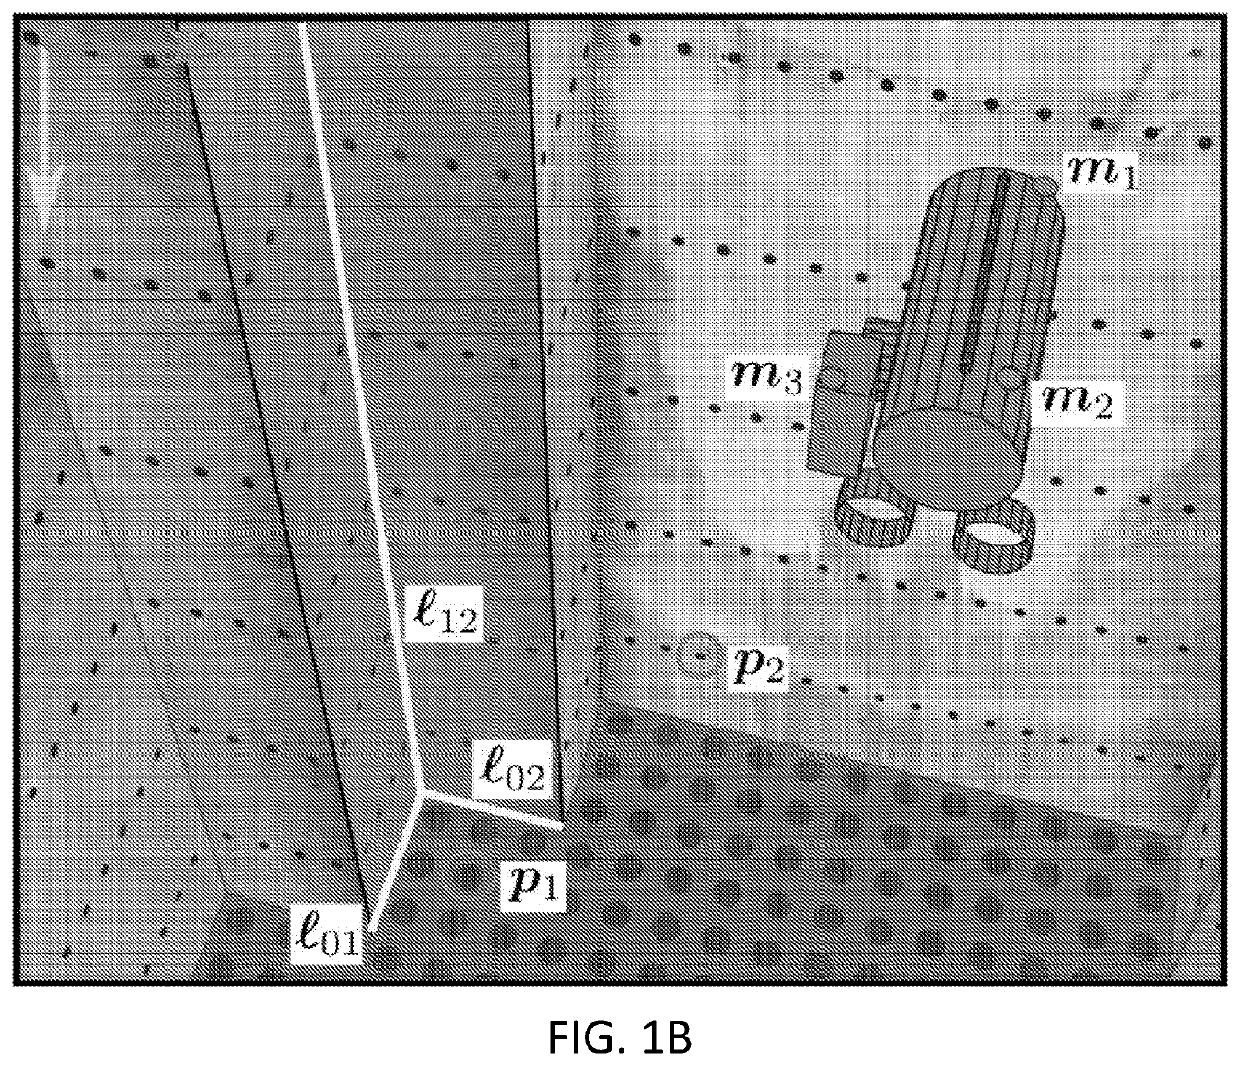 State estimation and localization for ROV-based structural inspection